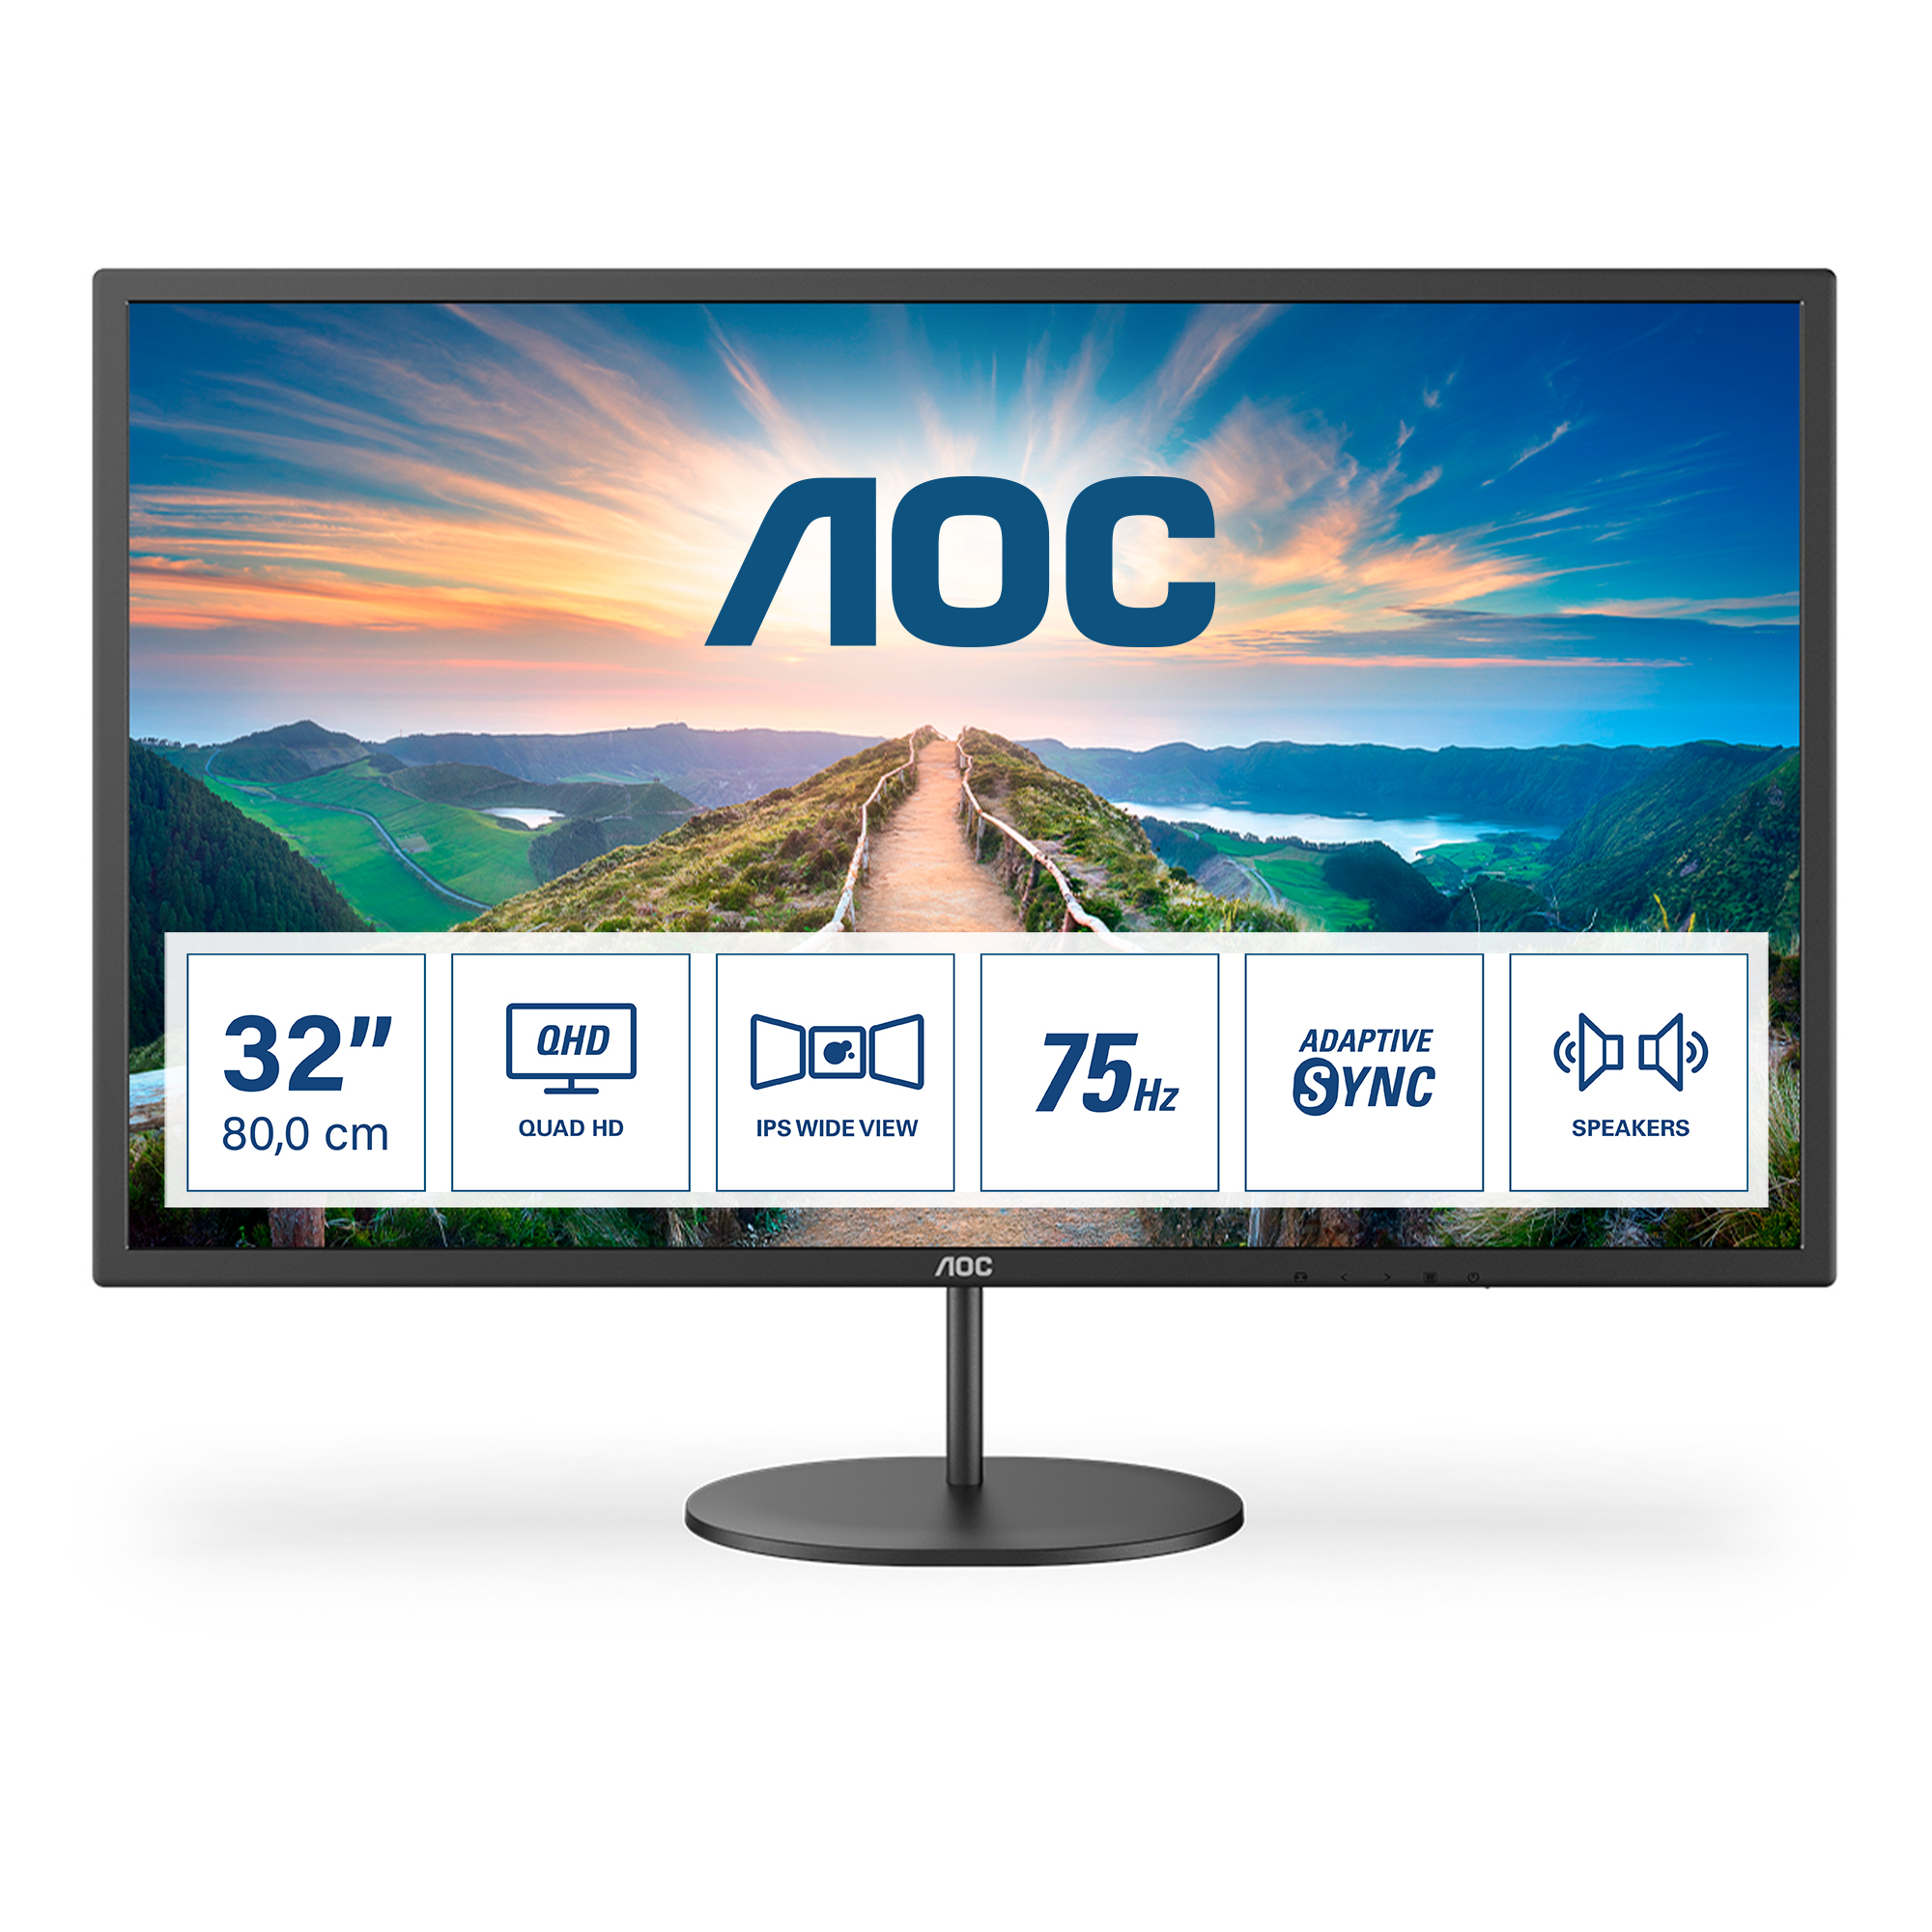 Screen size (inch) 31.5, Panel resolution 2560x1440, Refresh rate 75 Hz, Panel type IPS, HDMI HDMI 1.4 x 1, Display Port DisplayPort 1.2 x 1, Sync technology (VRR) Adaptive Sync